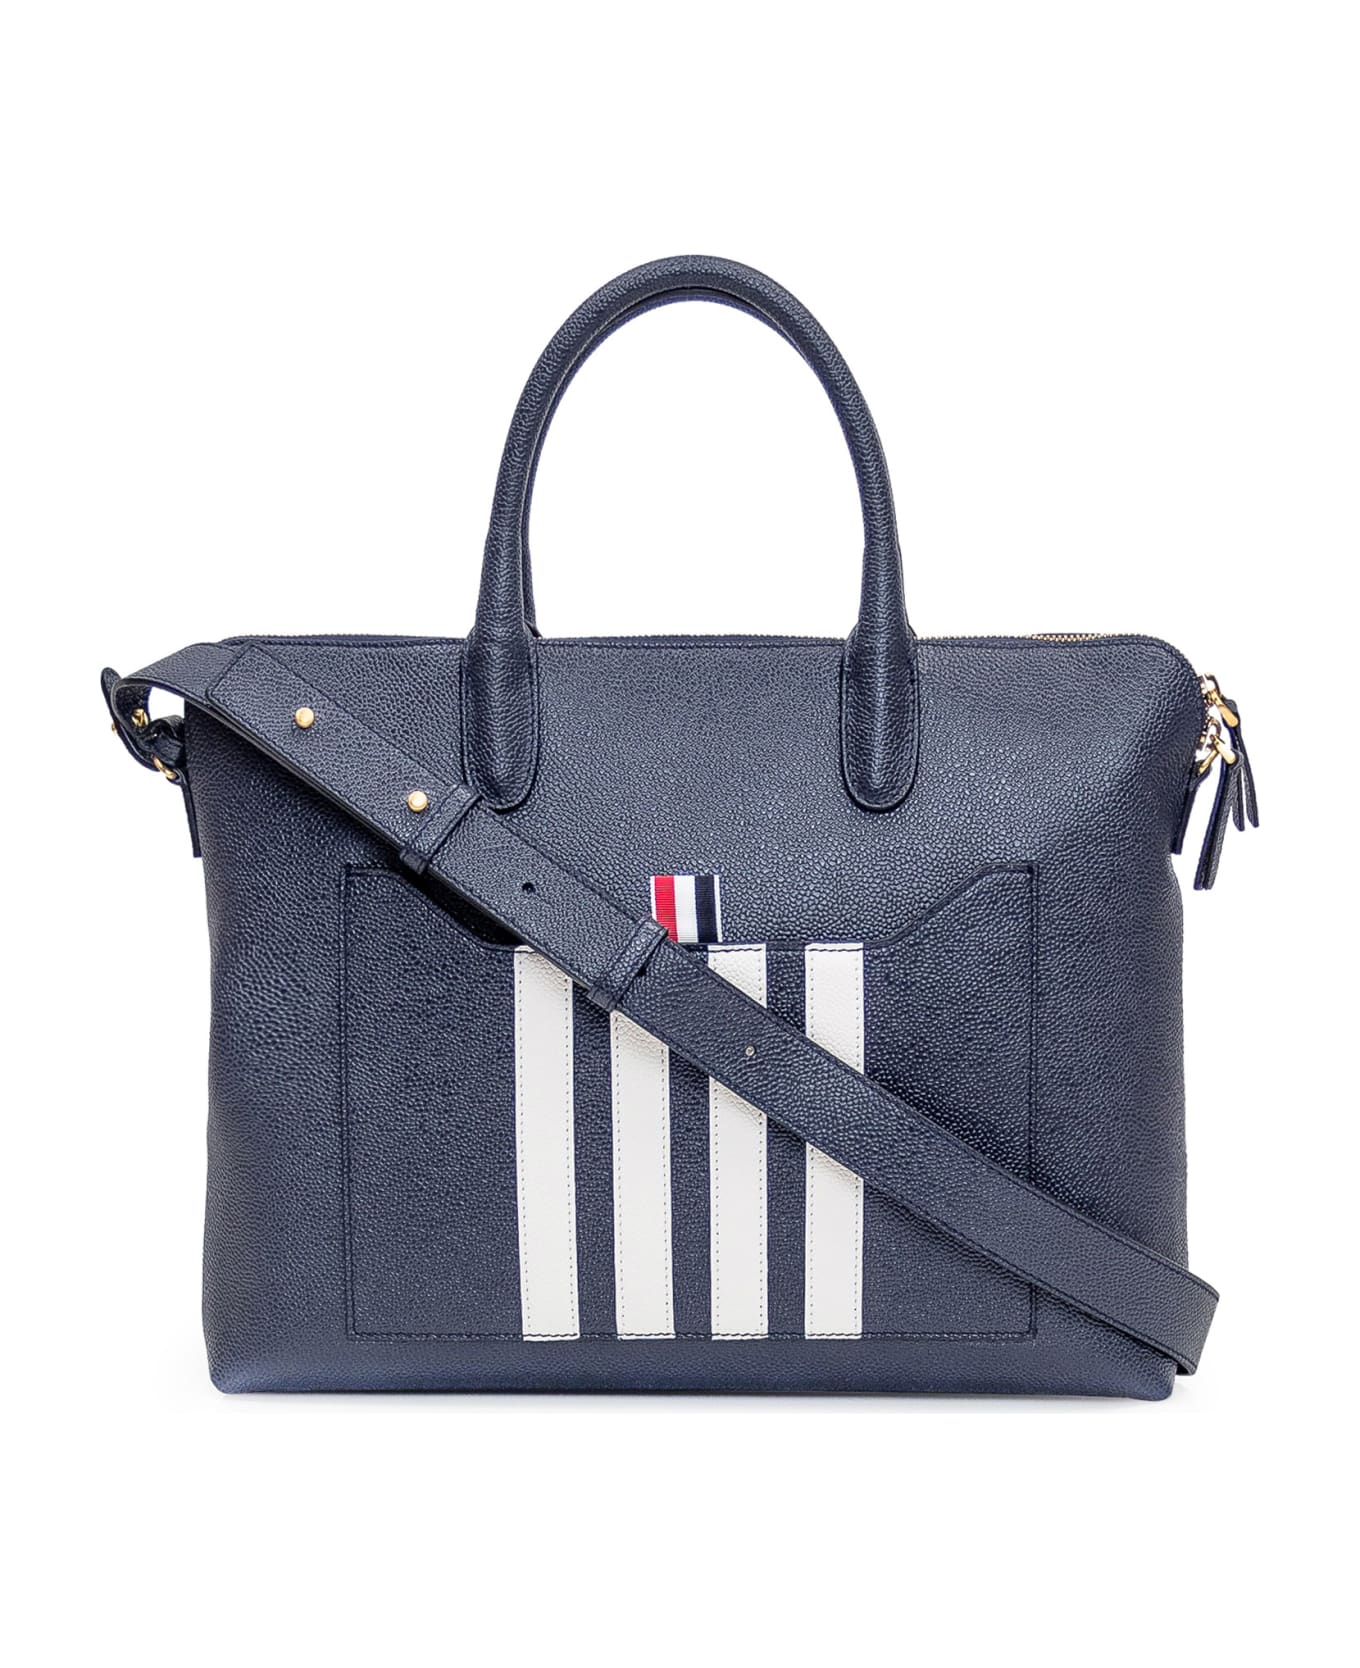 Thom Browne Bag With Logo - NAVY